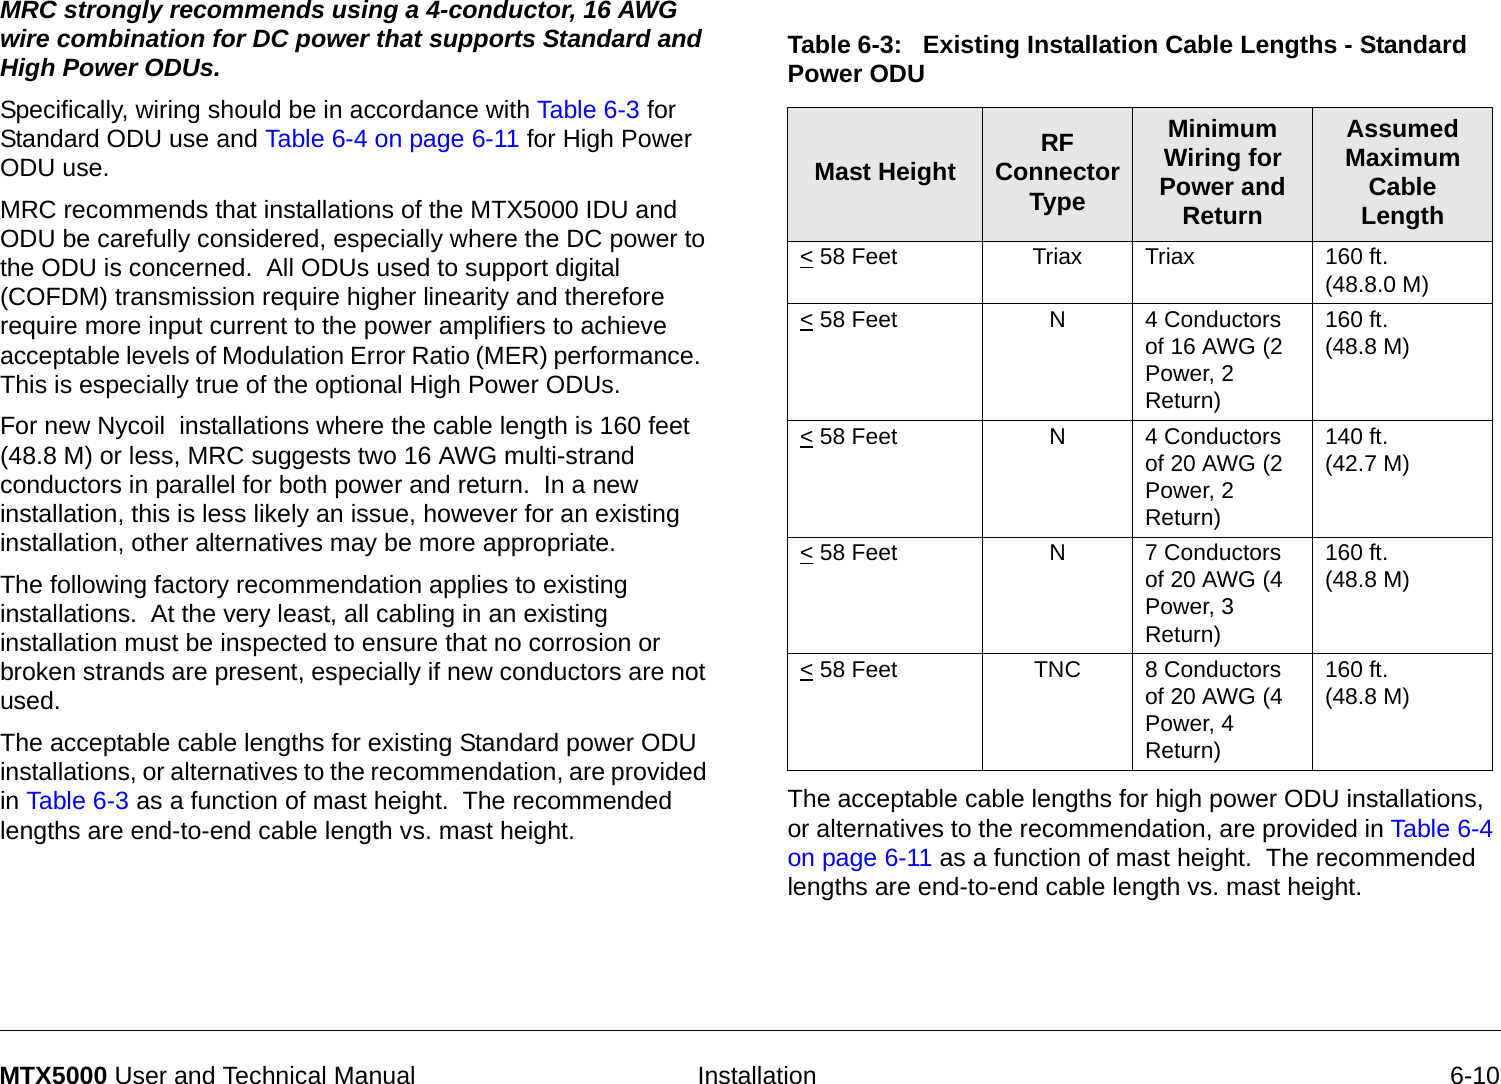   Installation 6-10MTX5000 User and Technical ManualMRC strongly recommends using a 4-conductor, 16 AWG wire combination for DC power that supports Standard and High Power ODUs.  Specifically, wiring should be in accordance with Table 6-3 for Standard ODU use and Table 6-4 on page 6-11 for High Power ODU use.MRC recommends that installations of the MTX5000 IDU and ODU be carefully considered, especially where the DC power to the ODU is concerned.  All ODUs used to support digital (COFDM) transmission require higher linearity and therefore require more input current to the power amplifiers to achieve acceptable levels of Modulation Error Ratio (MER) performance.  This is especially true of the optional High Power ODUs.For new Nycoil  installations where the cable length is 160 feet (48.8 M) or less, MRC suggests two 16 AWG multi-strand conductors in parallel for both power and return.  In a new installation, this is less likely an issue, however for an existing installation, other alternatives may be more appropriate.  The following factory recommendation applies to existing installations.  At the very least, all cabling in an existing installation must be inspected to ensure that no corrosion or broken strands are present, especially if new conductors are not used.The acceptable cable lengths for existing Standard power ODU installations, or alternatives to the recommendation, are provided in Table 6-3 as a function of mast height.  The recommended lengths are end-to-end cable length vs. mast height.   The acceptable cable lengths for high power ODU installations, or alternatives to the recommendation, are provided in Table 6-4 on page 6-11 as a function of mast height.  The recommended lengths are end-to-end cable length vs. mast height.Table 6-3:   Existing Installation Cable Lengths - Standard Power ODU Mast Height RF Connector TypeMinimum Wiring for Power and ReturnAssumed Maximum Cable Length&lt; 58 Feet Triax Triax 160 ft.  (48.8.0 M)&lt; 58 Feet  N4 Conductors of 16 AWG (2 Power, 2 Return)160 ft. (48.8 M)&lt; 58 Feet N4 Conductors of 20 AWG (2 Power, 2 Return)140 ft.  (42.7 M)&lt; 58 Feet N7 Conductors of 20 AWG (4 Power, 3 Return)160 ft.  (48.8 M)&lt; 58 Feet  TNC 8 Conductors of 20 AWG (4 Power, 4 Return)160 ft. (48.8 M)